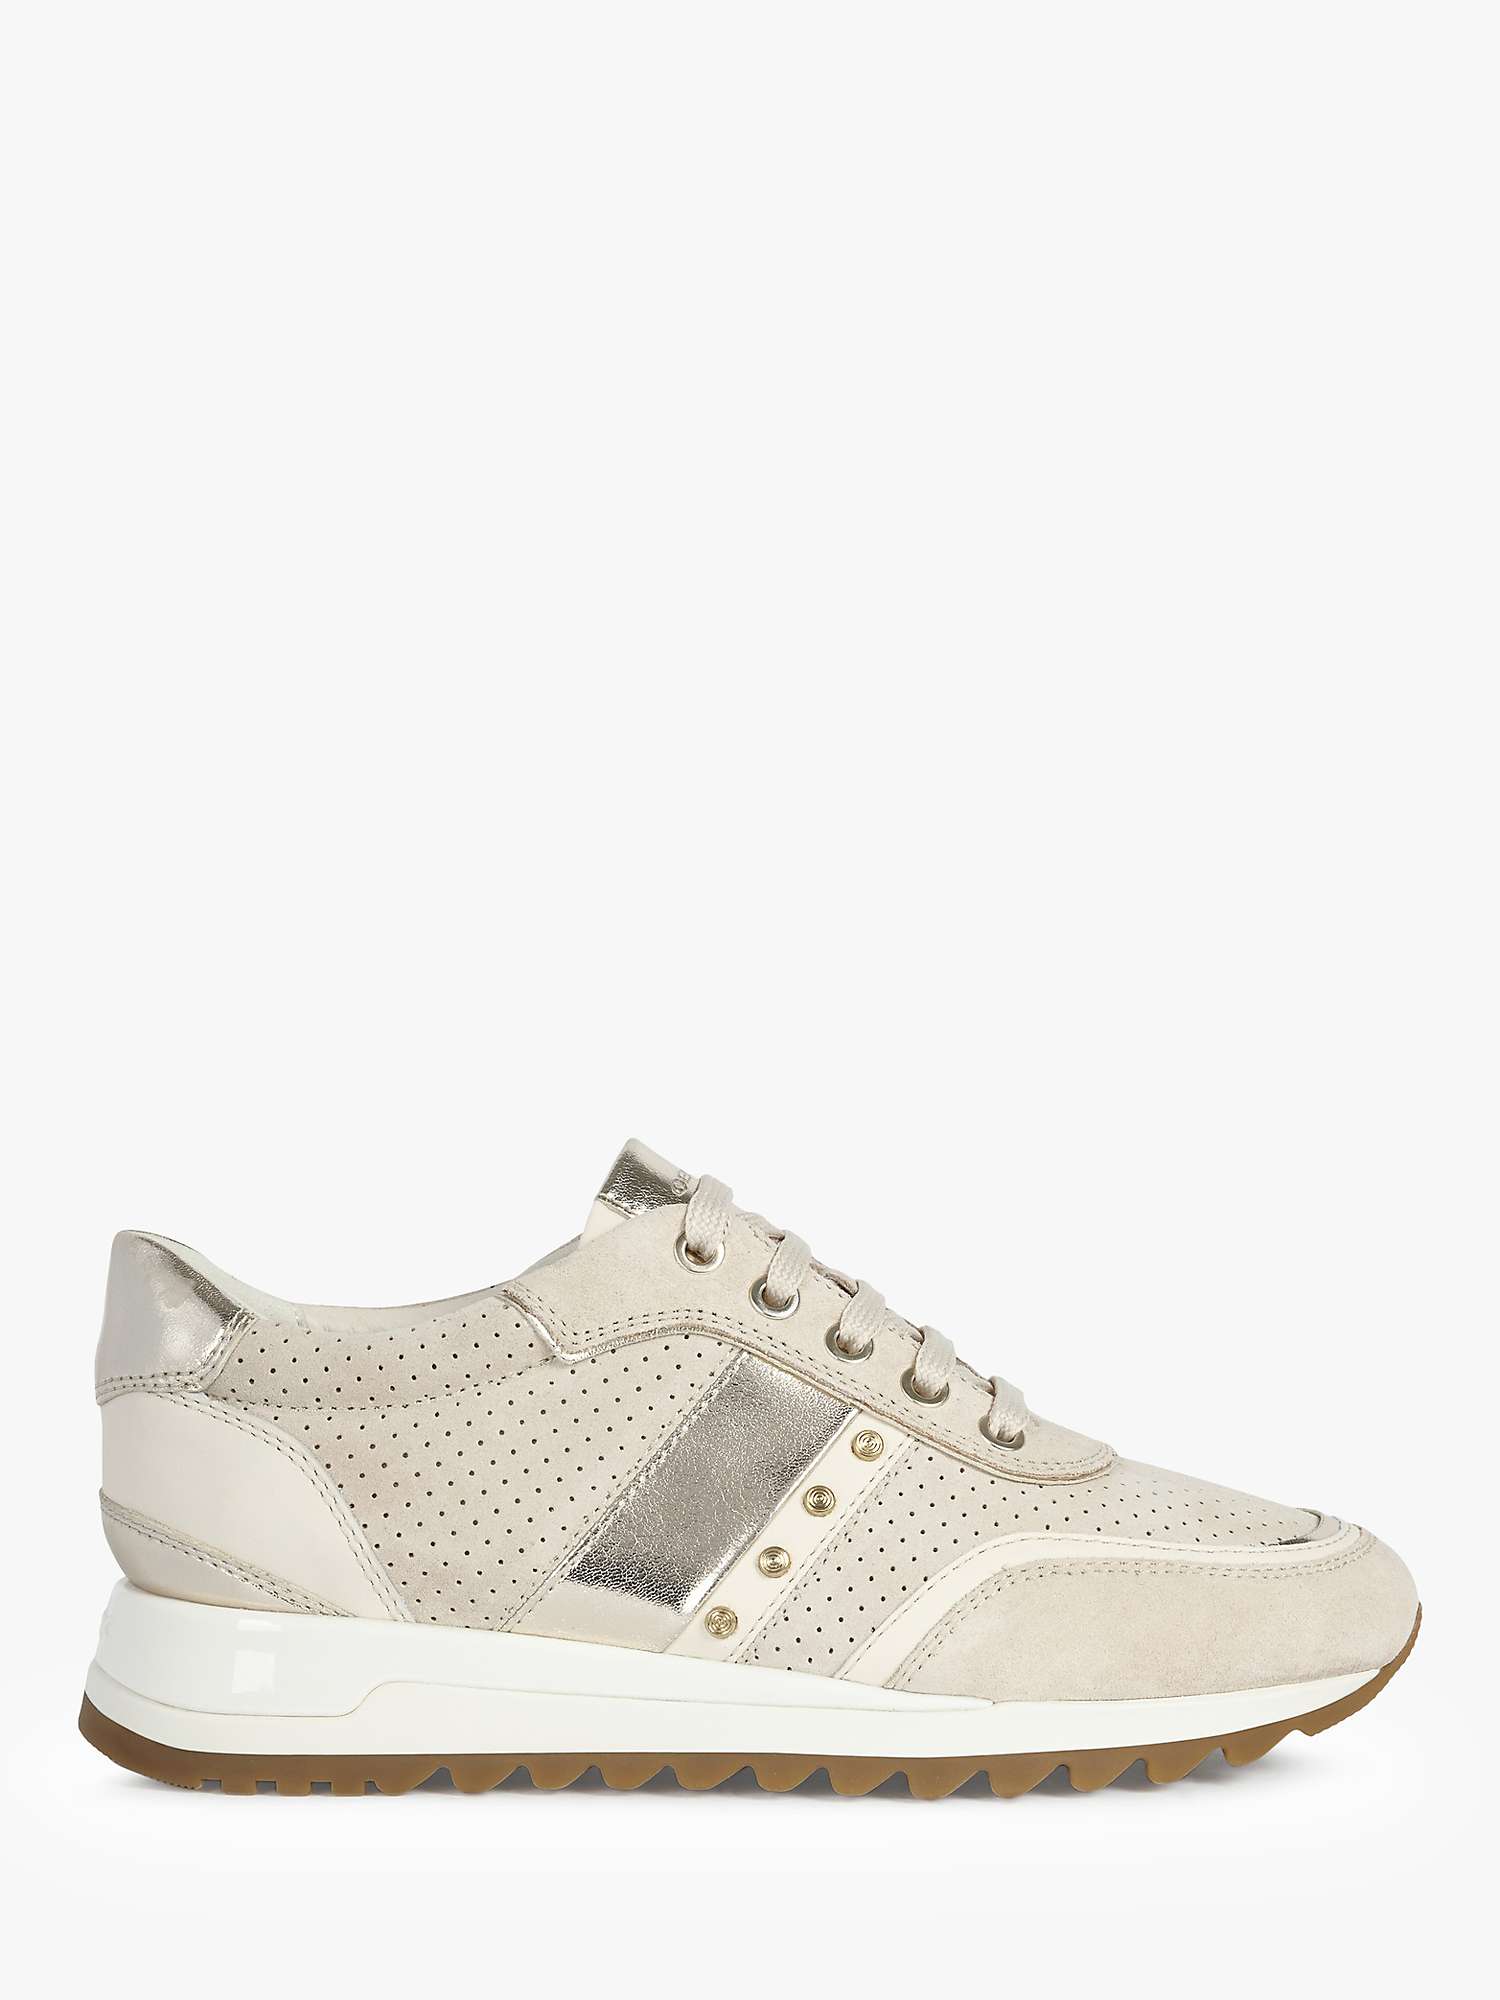 Buy Geox Women's Tabelya Wide Fit Studded Lace Up Trainers, Beige Online at johnlewis.com